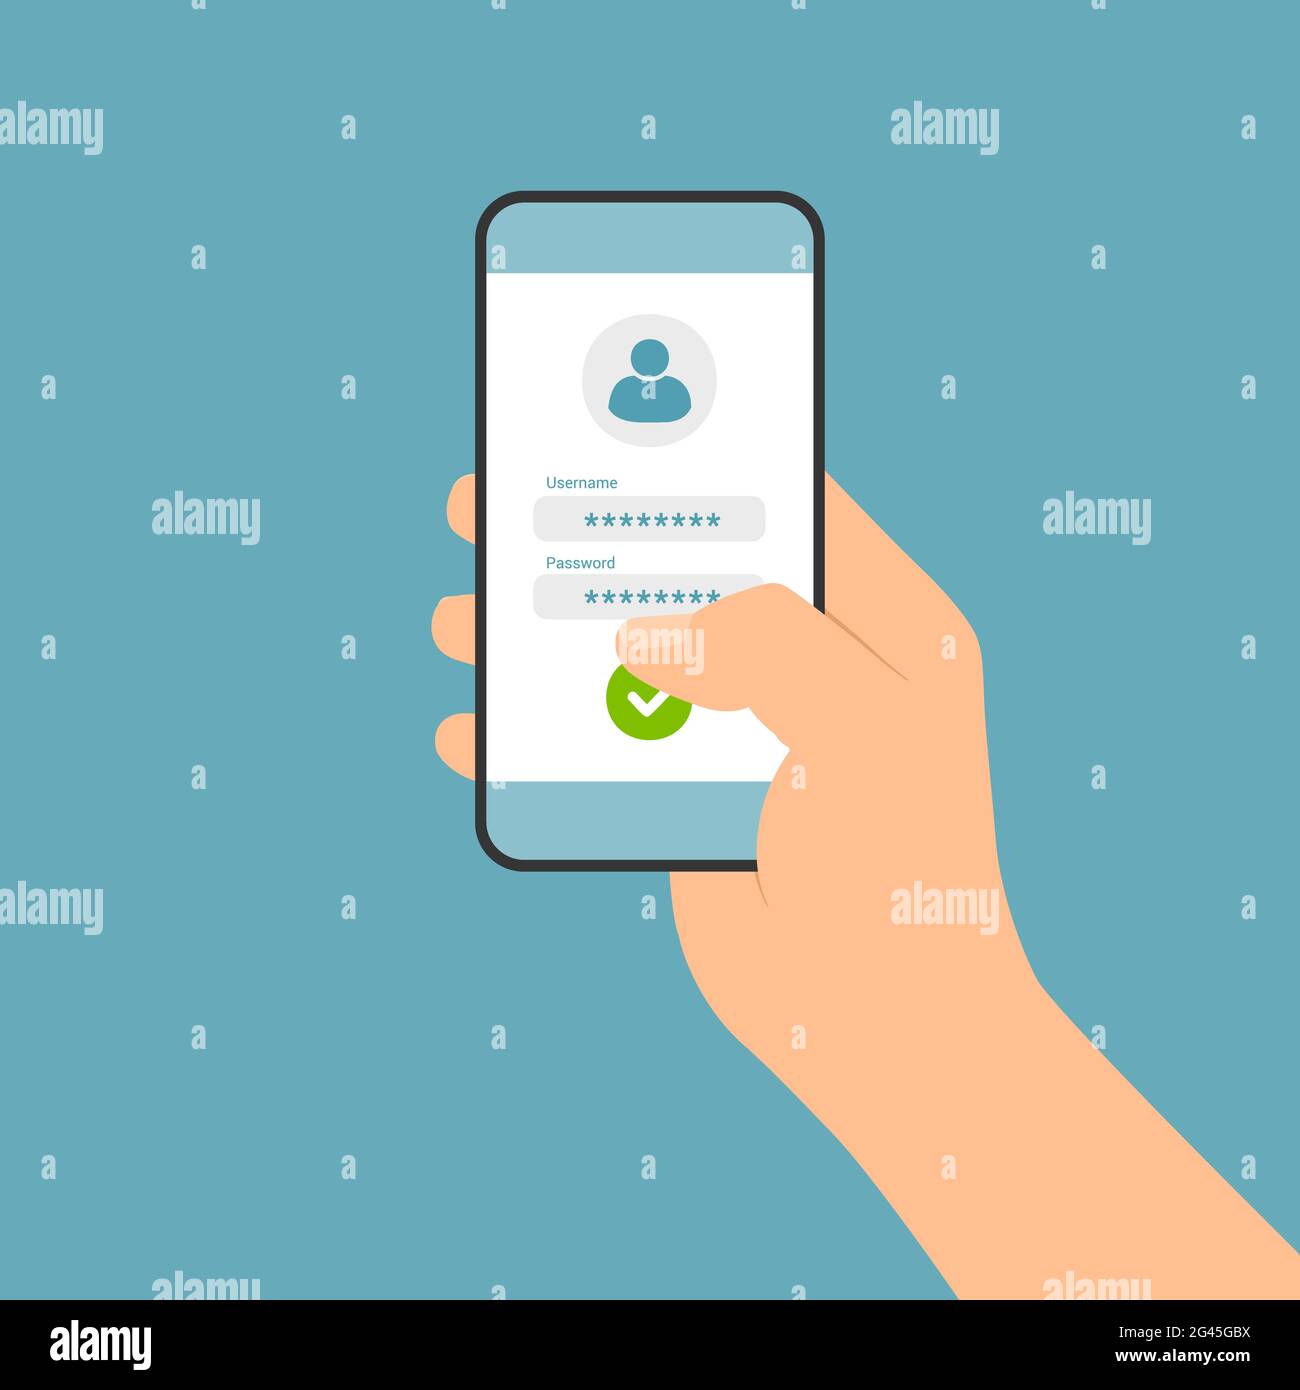 Flat design illustration of hand holding touch screen smartphone. Login form for entering username and password - vector Stock Vector